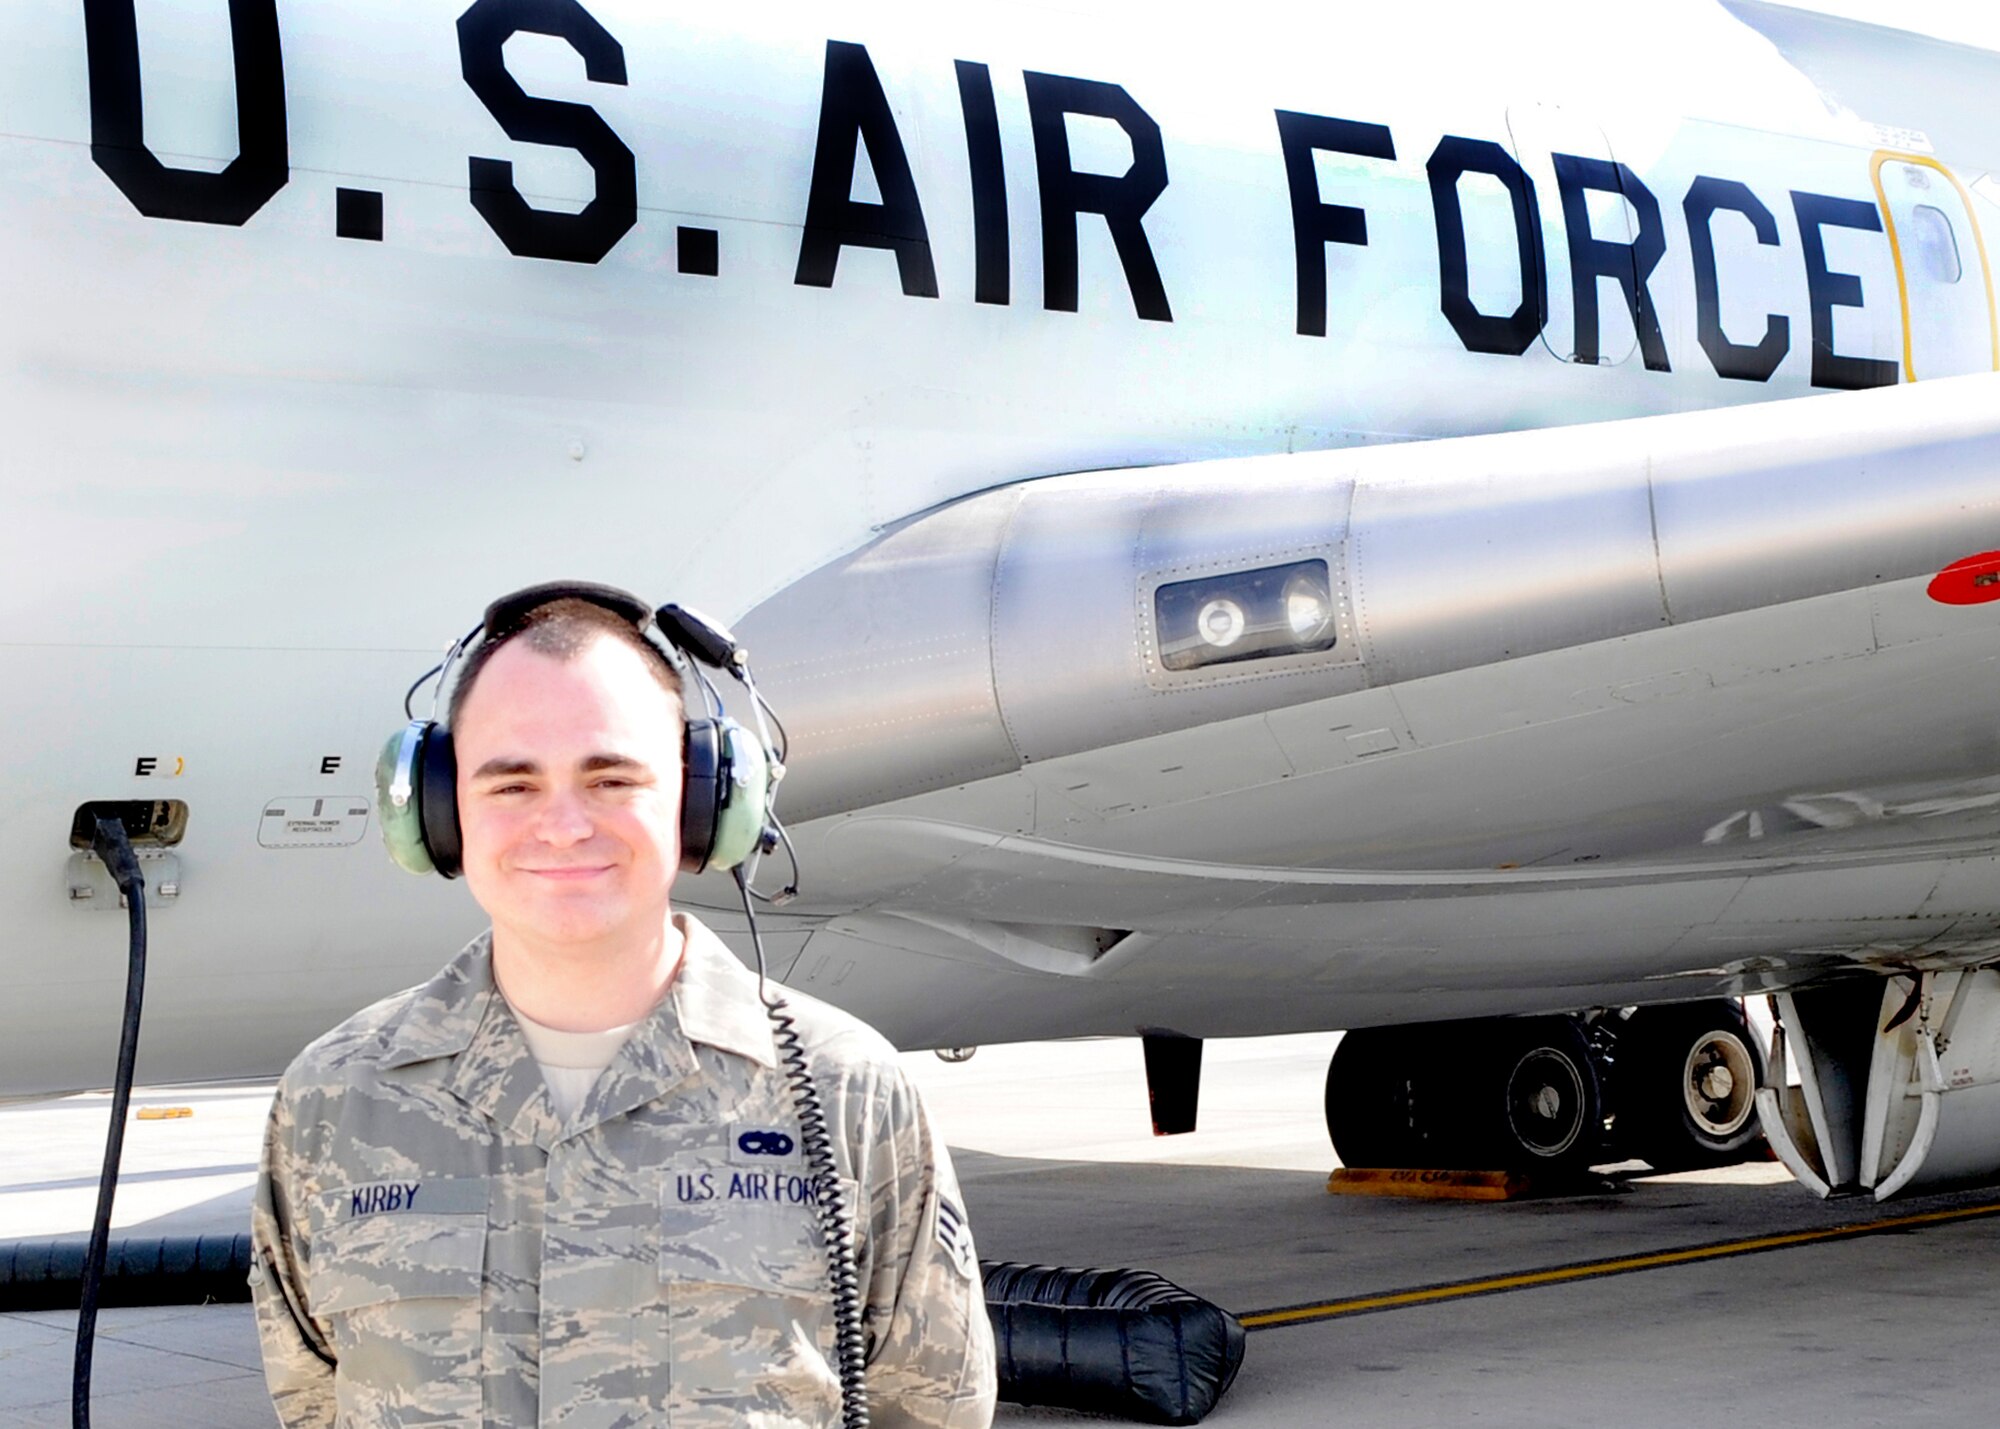 Senior Airman Robert Kirby, an instrument and flight control systems journeyman, maintains the airborne warning and control system on the E-3 Sentry AWACS at a non-disclosed base in Southwest Asia. Here he is pictured near an E-3 on Jan. 23, 2010. Airman Kirby is deployed from the 552nd Aircraft Maintenance Squadron at Tinker Air Force Base, Okla., and his hometown is Fayetteville, Ga. (U.S. Air Force Photo/Capt. Cathleen Snow/Released)